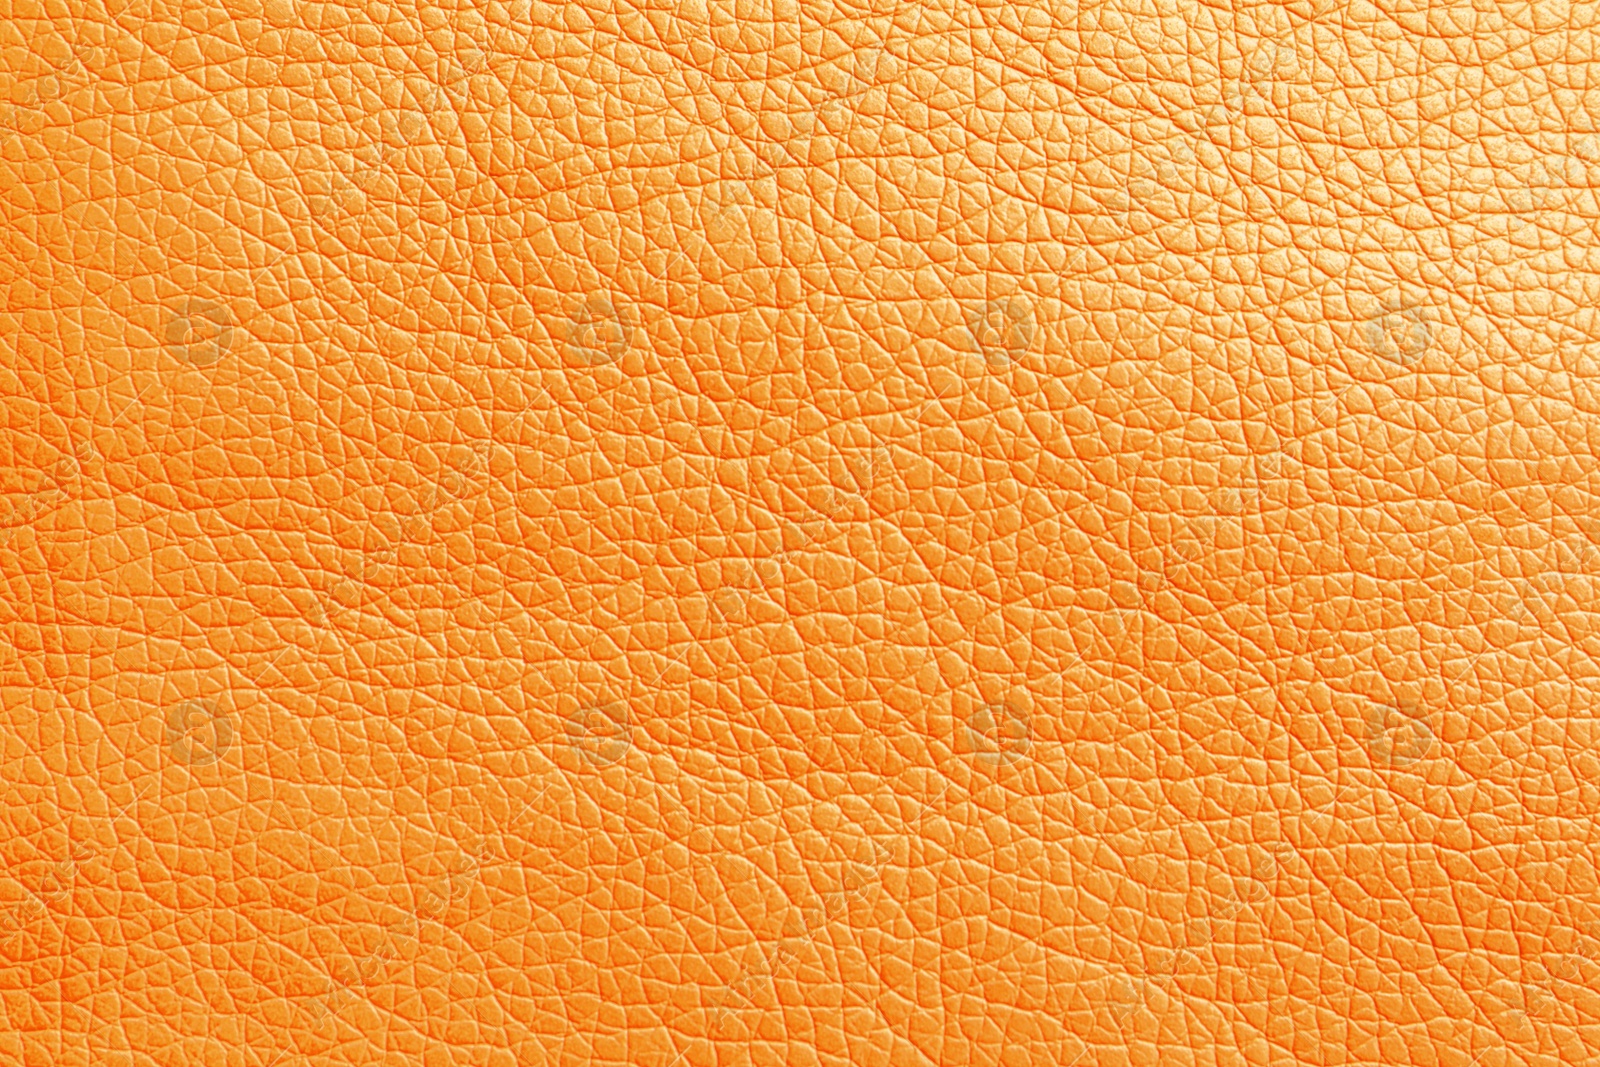 Image of Texture of orange leather as background, closeup